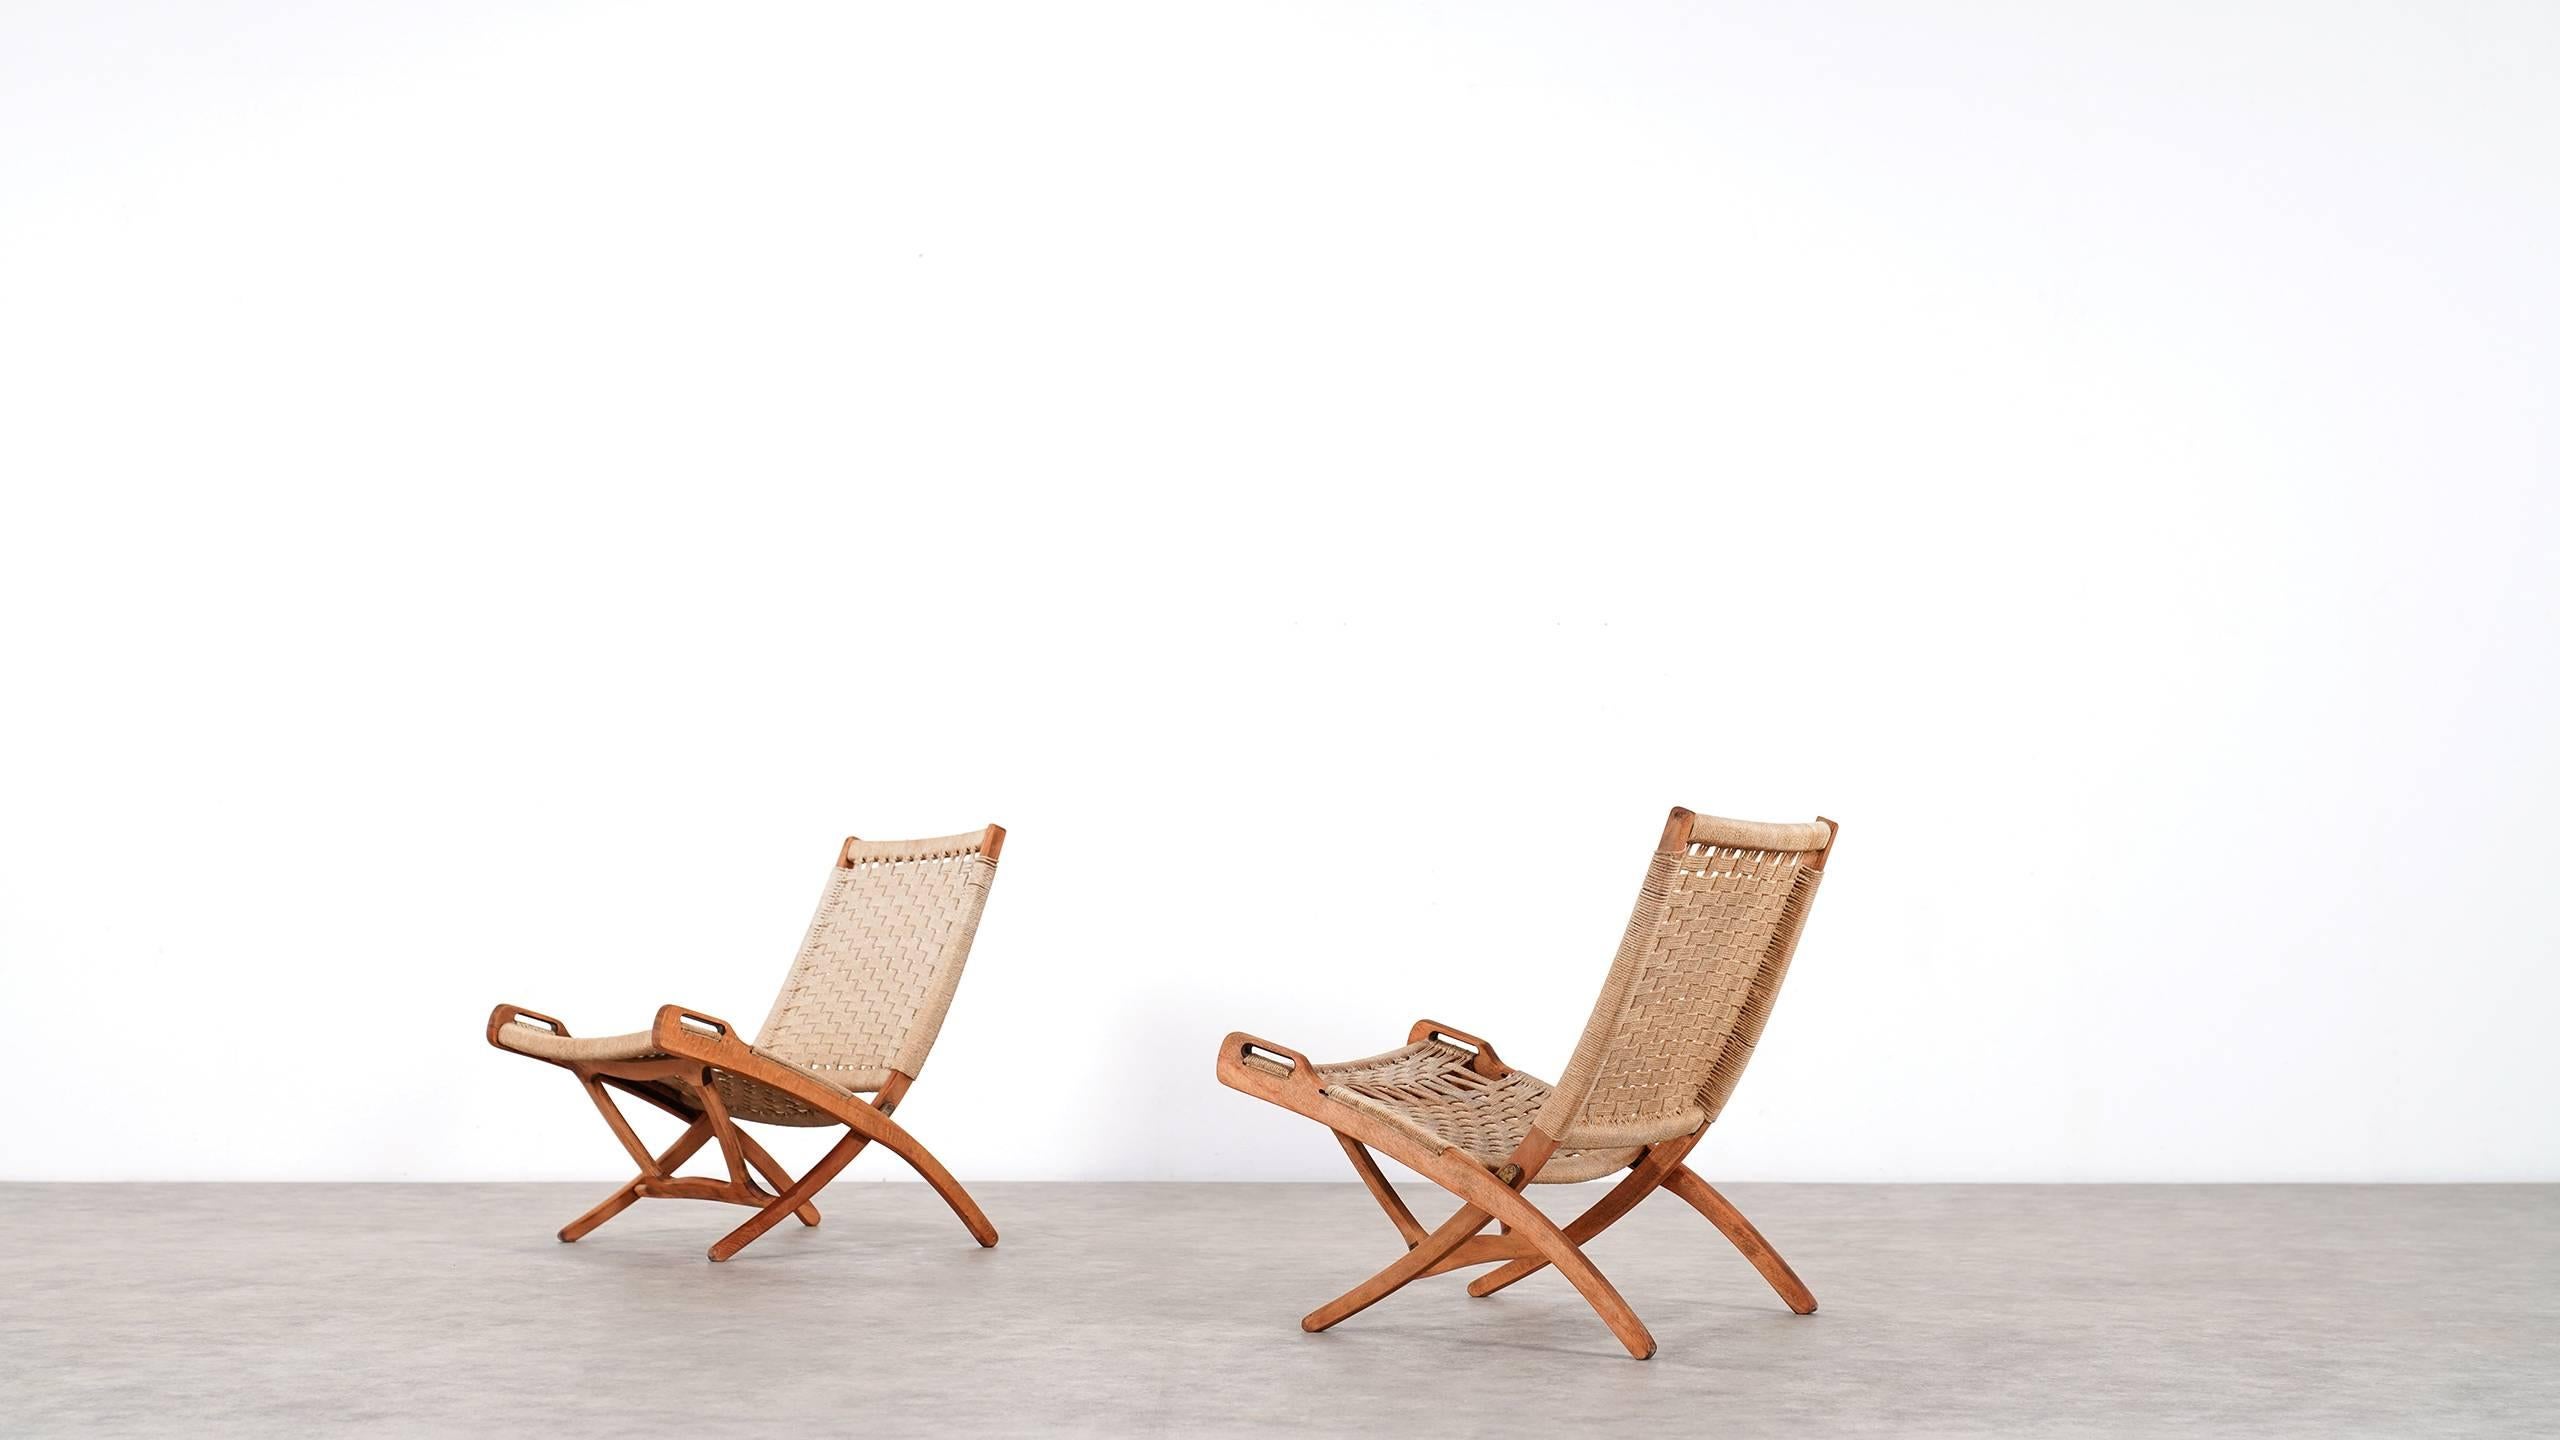 European Folding Chair, Hans J. Wegner Style, Wood and Rope Covering, circa 1960